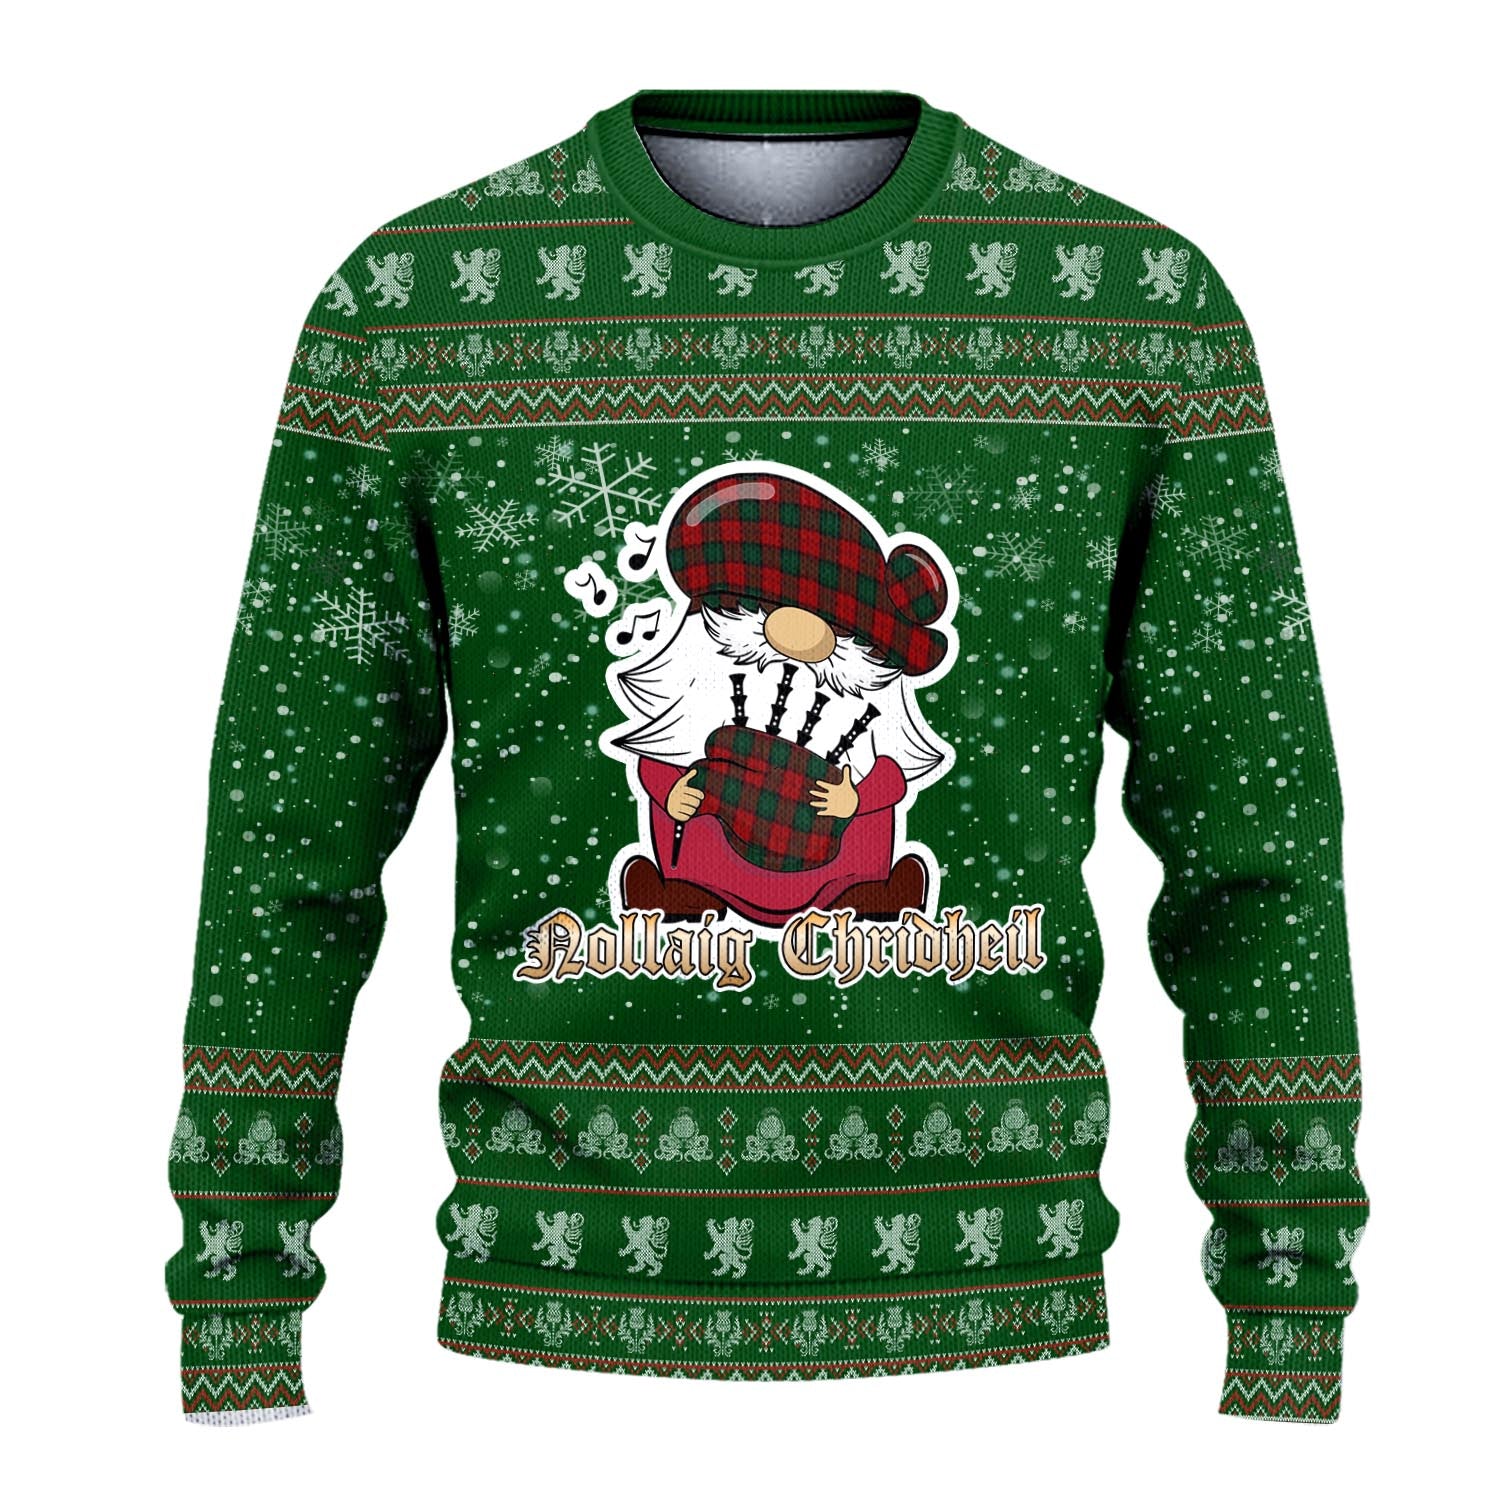 Stewart of Atholl Clan Christmas Family Knitted Sweater with Funny Gnome Playing Bagpipes - Tartanvibesclothing